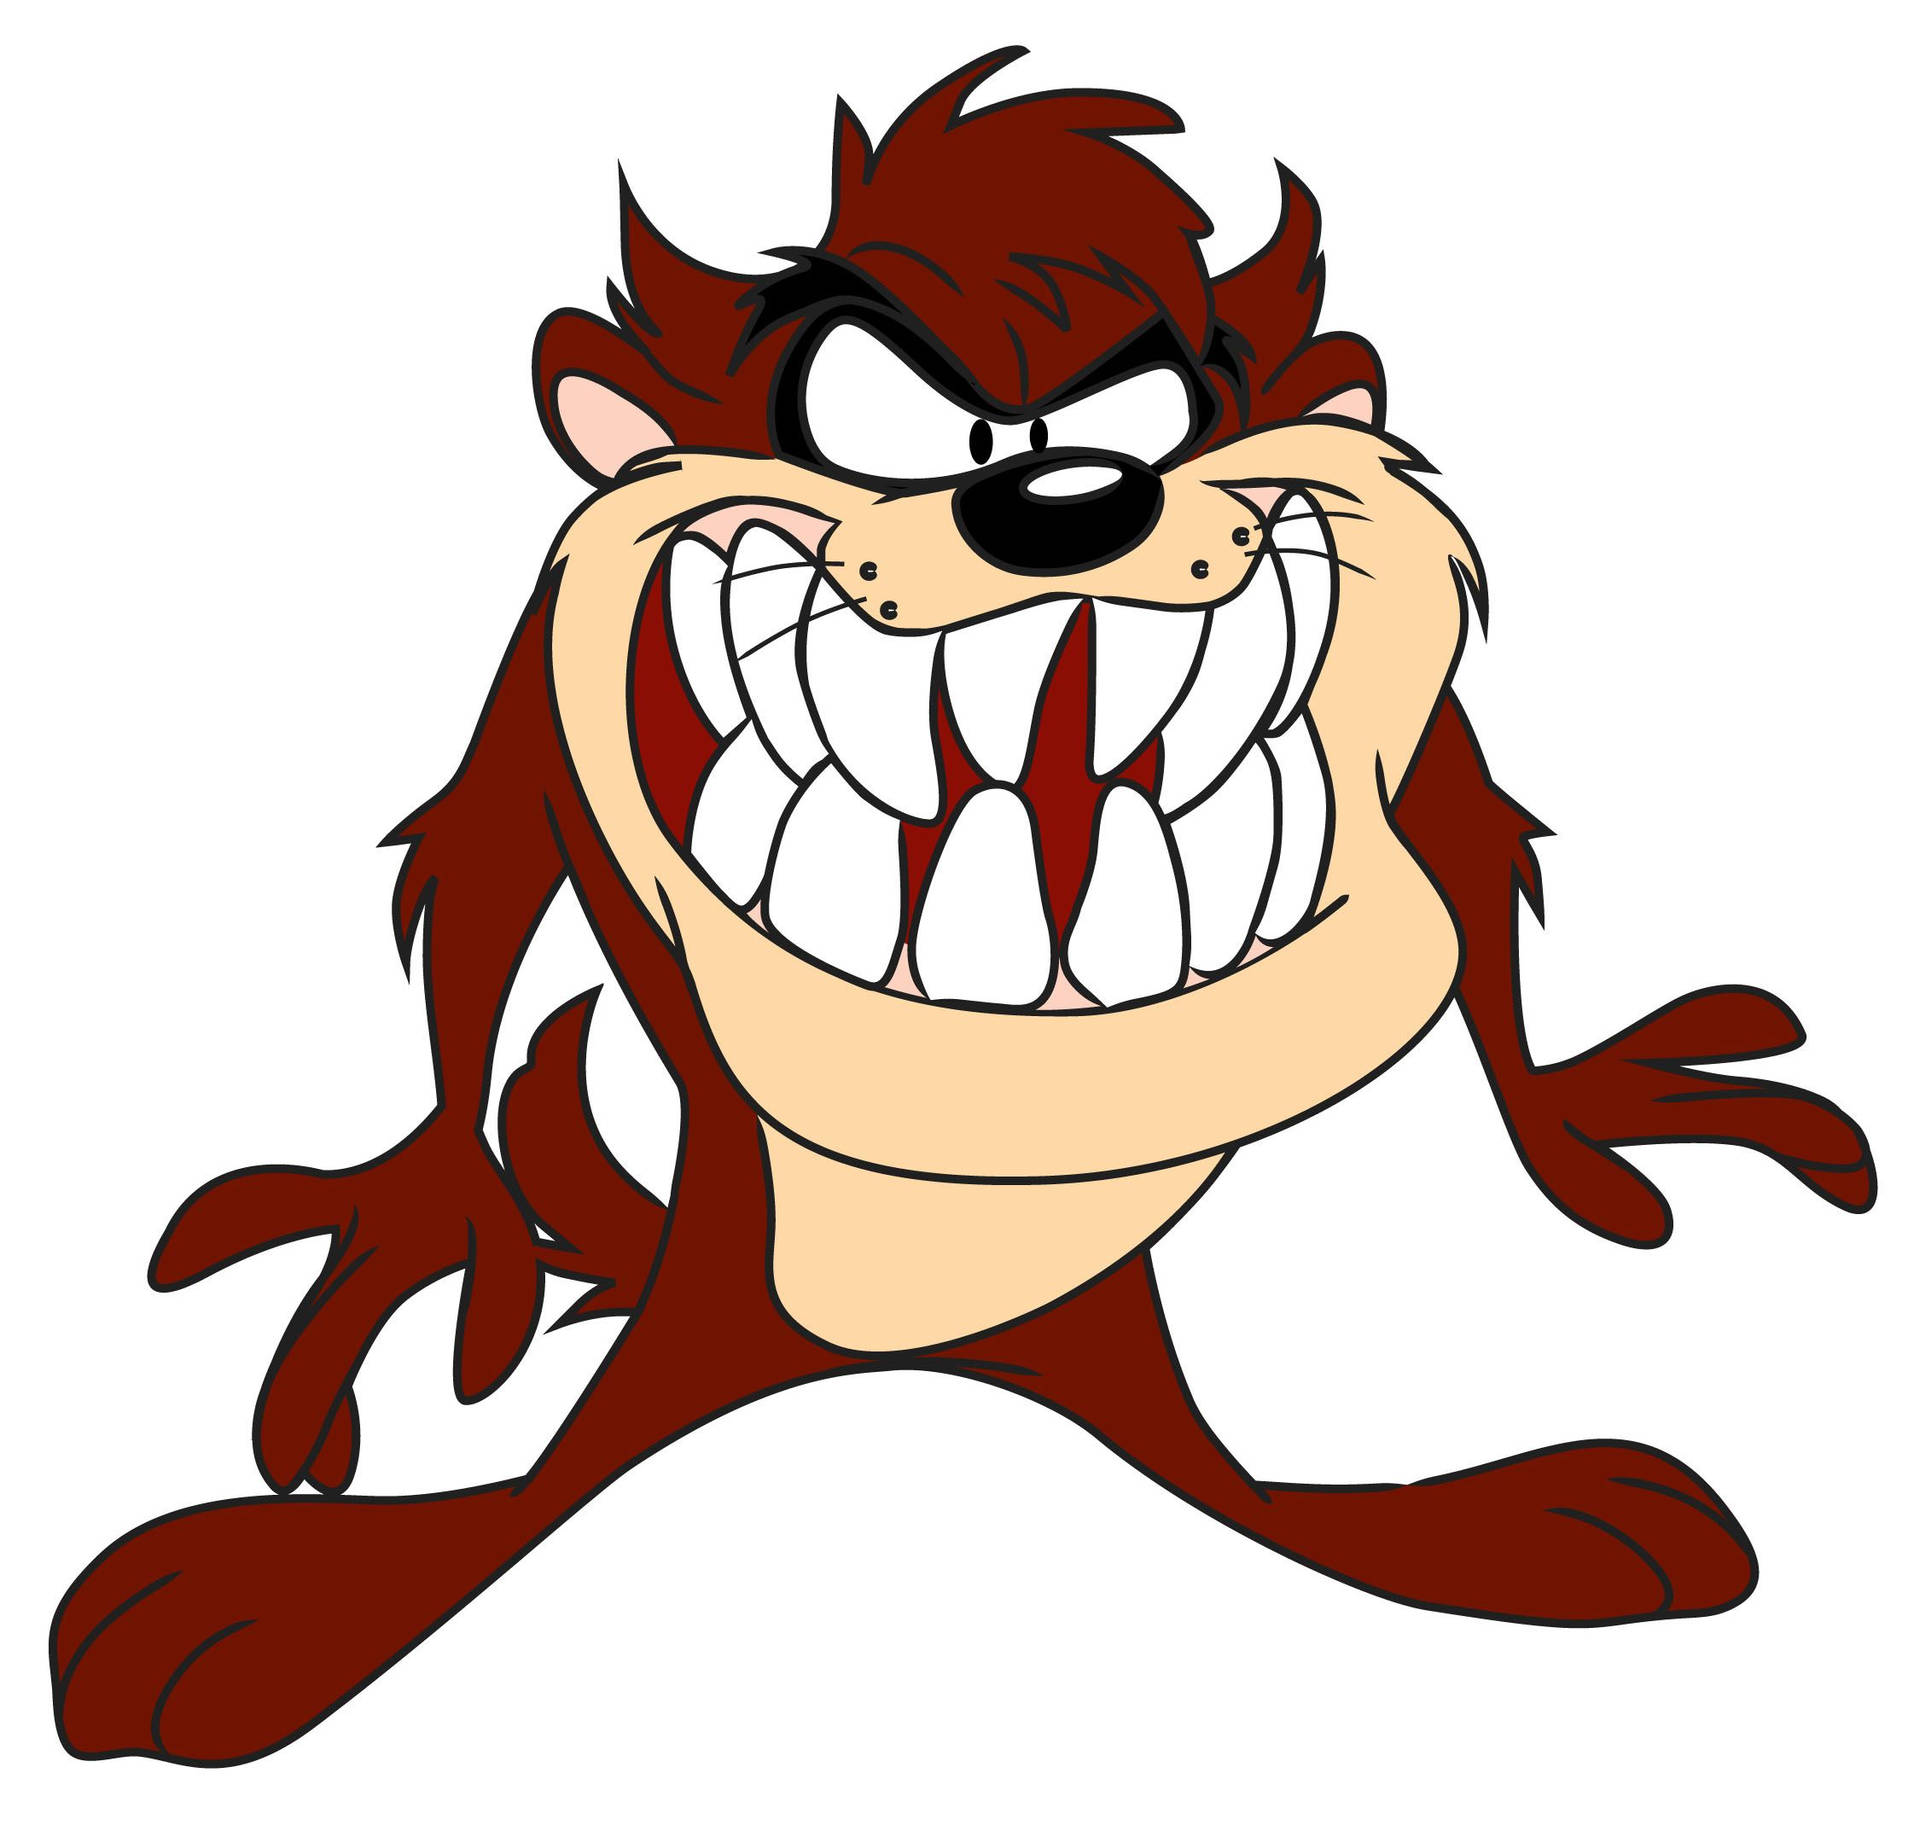 A Cartoon Character With A Big Mouth Background